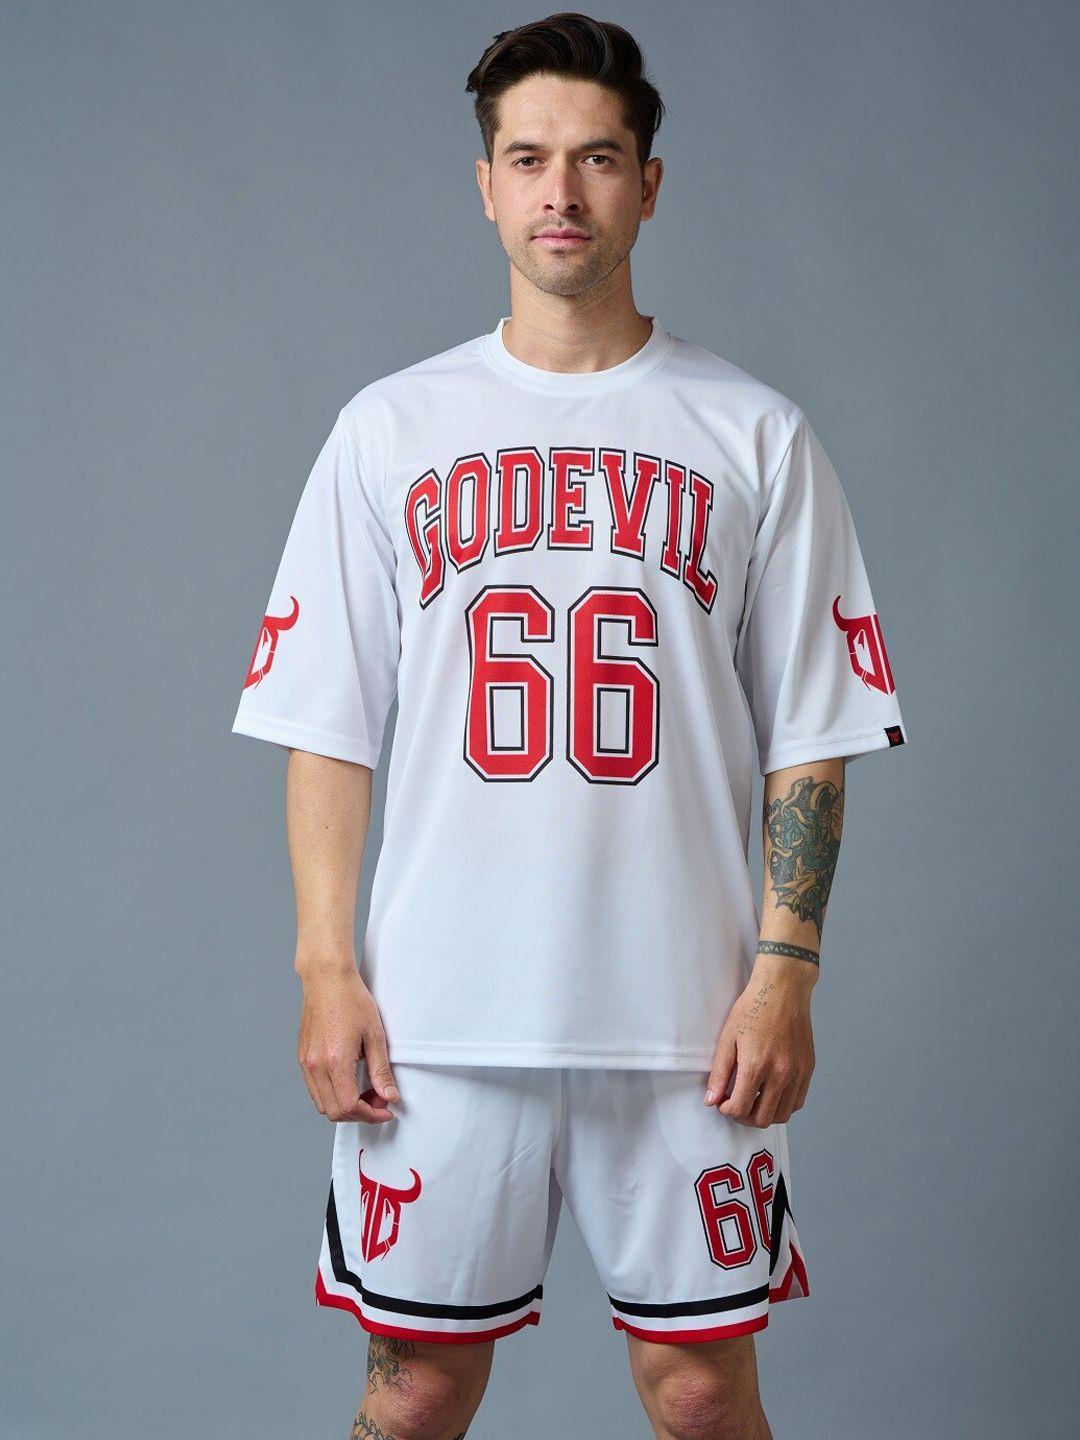 go devil printed t-shirt and shorts